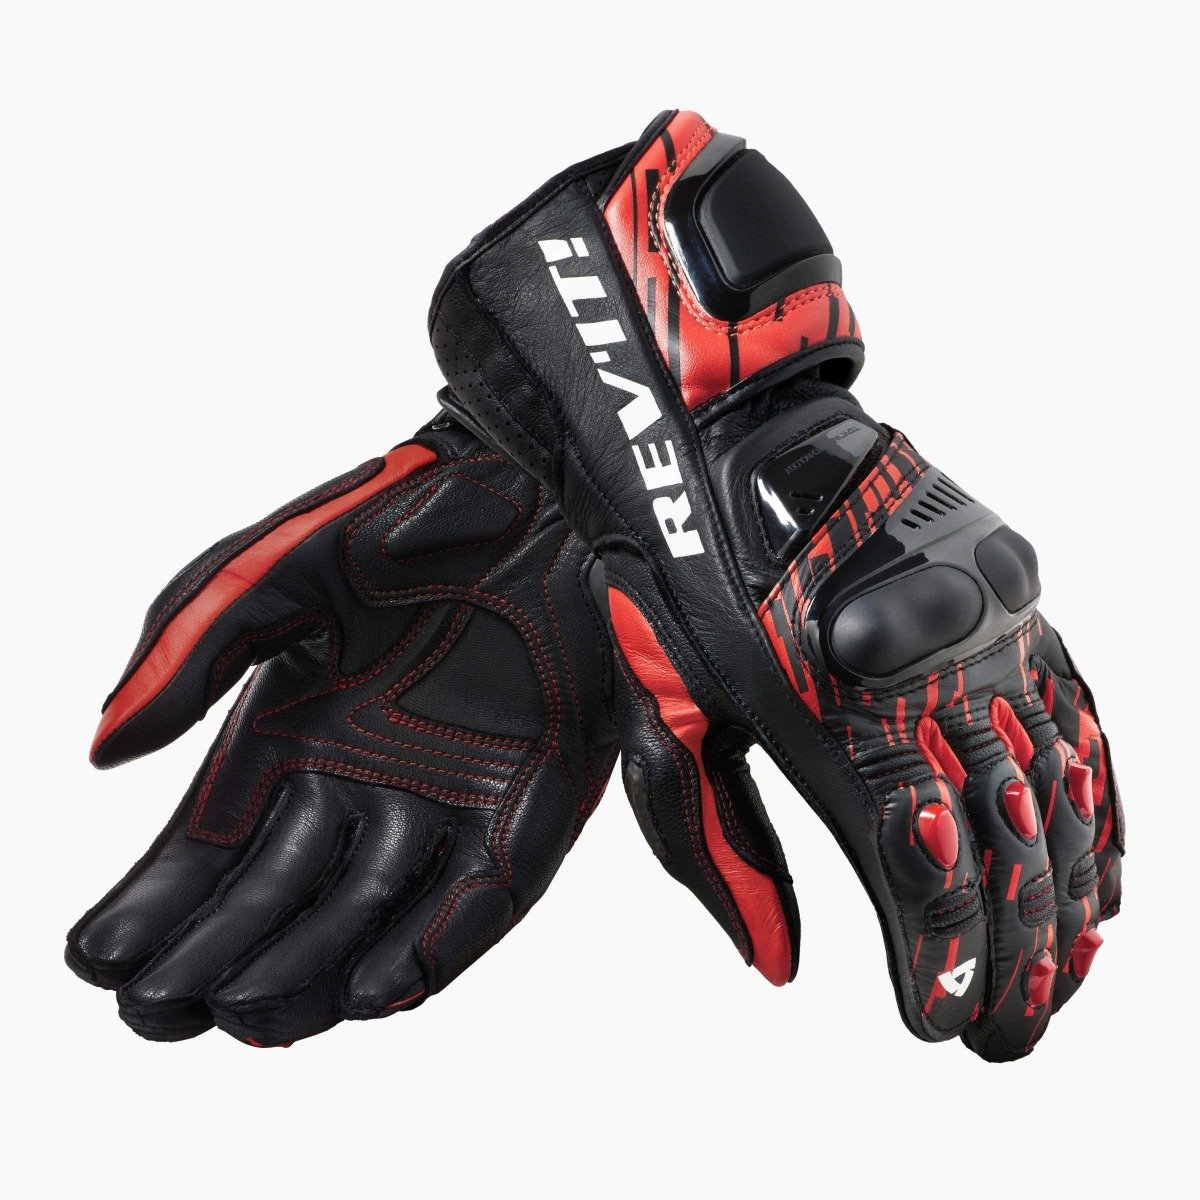 Image of REV'IT! Quantum 2 Neon Red Black Motorcycle Gloves Size XL ID 8700001308809